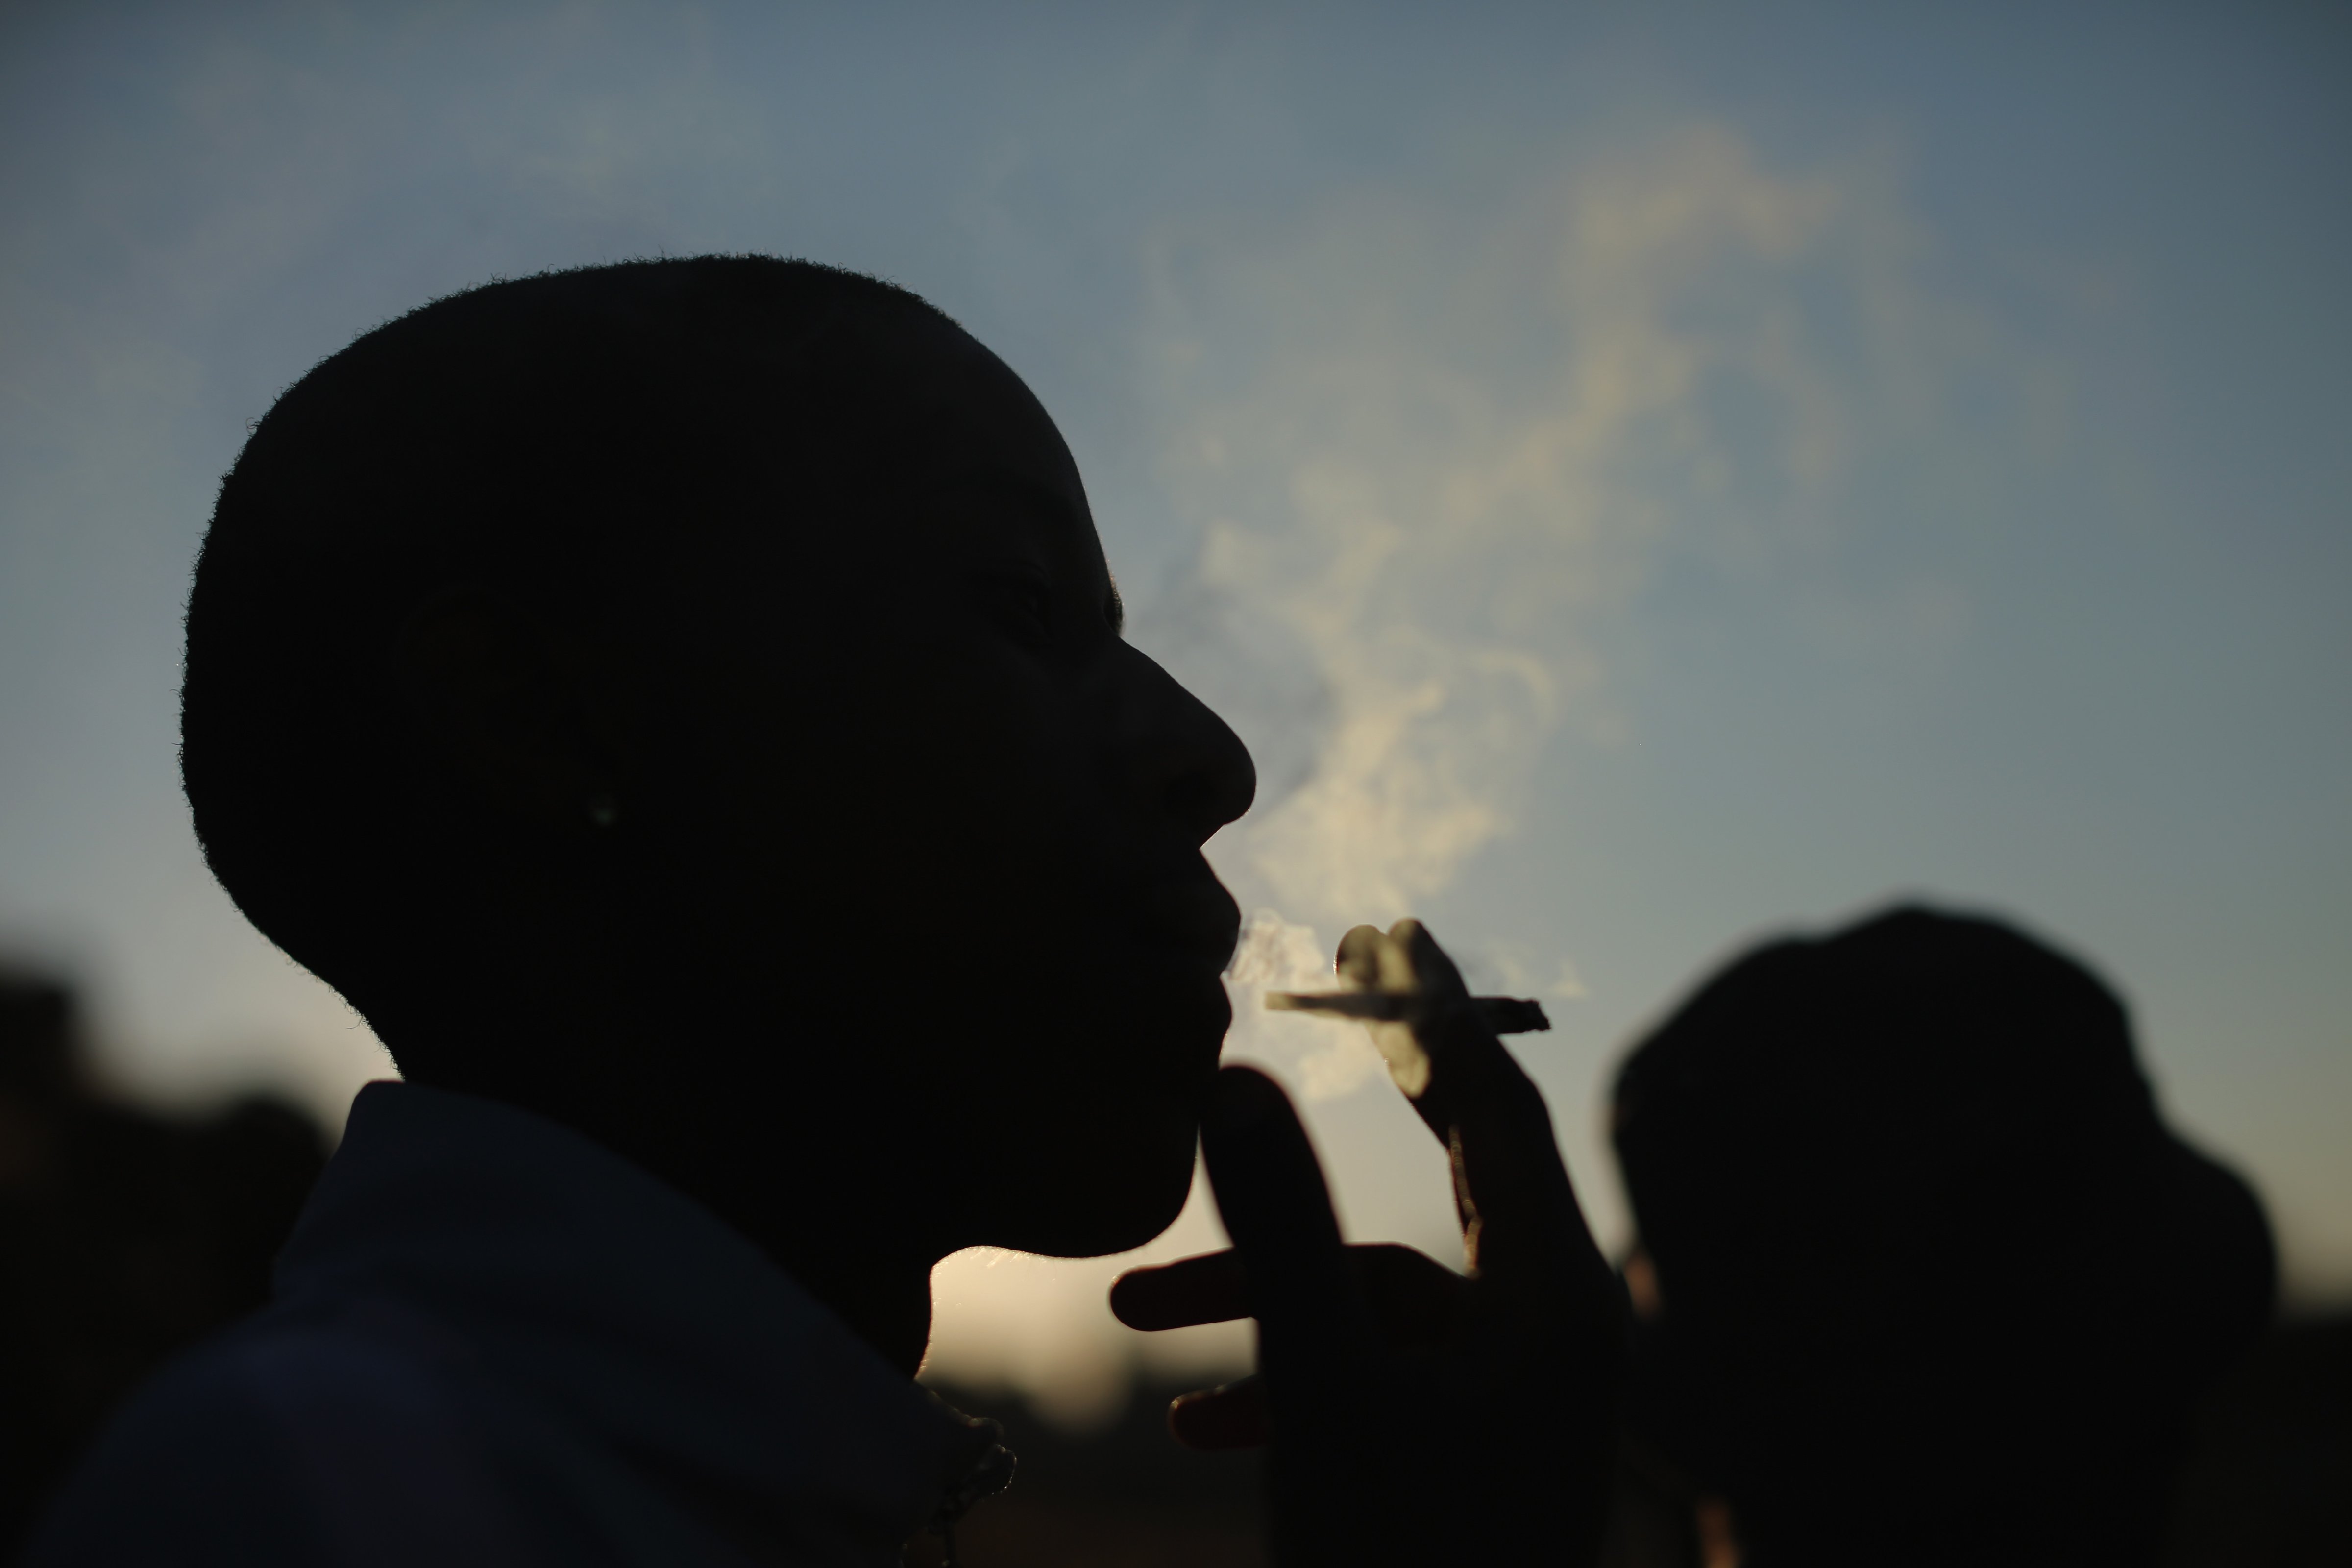 A youth smokes marijuana in Soweto township, near Johannesburg, on July 2, 2013 (Christopher Furlong—Getty Images)